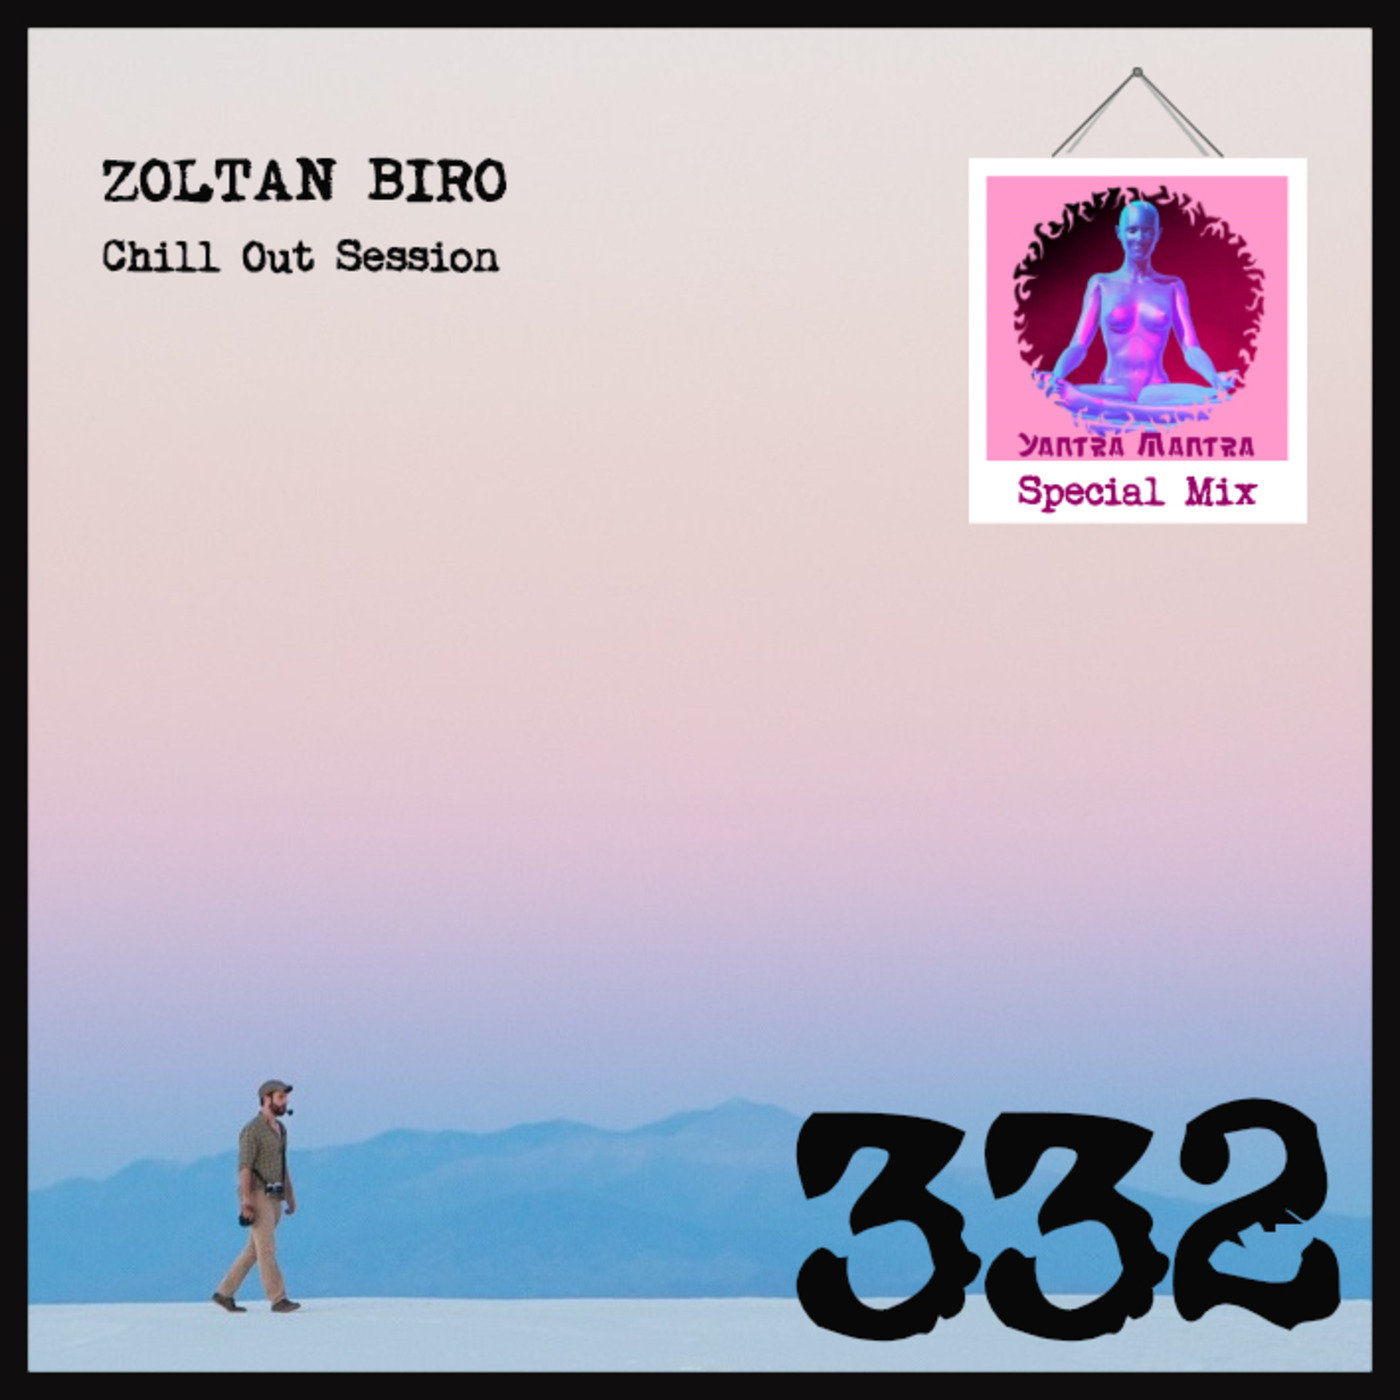 Zoltan Biro - Chill Out Session 332 [including: Yantra Mantra Special Mix]